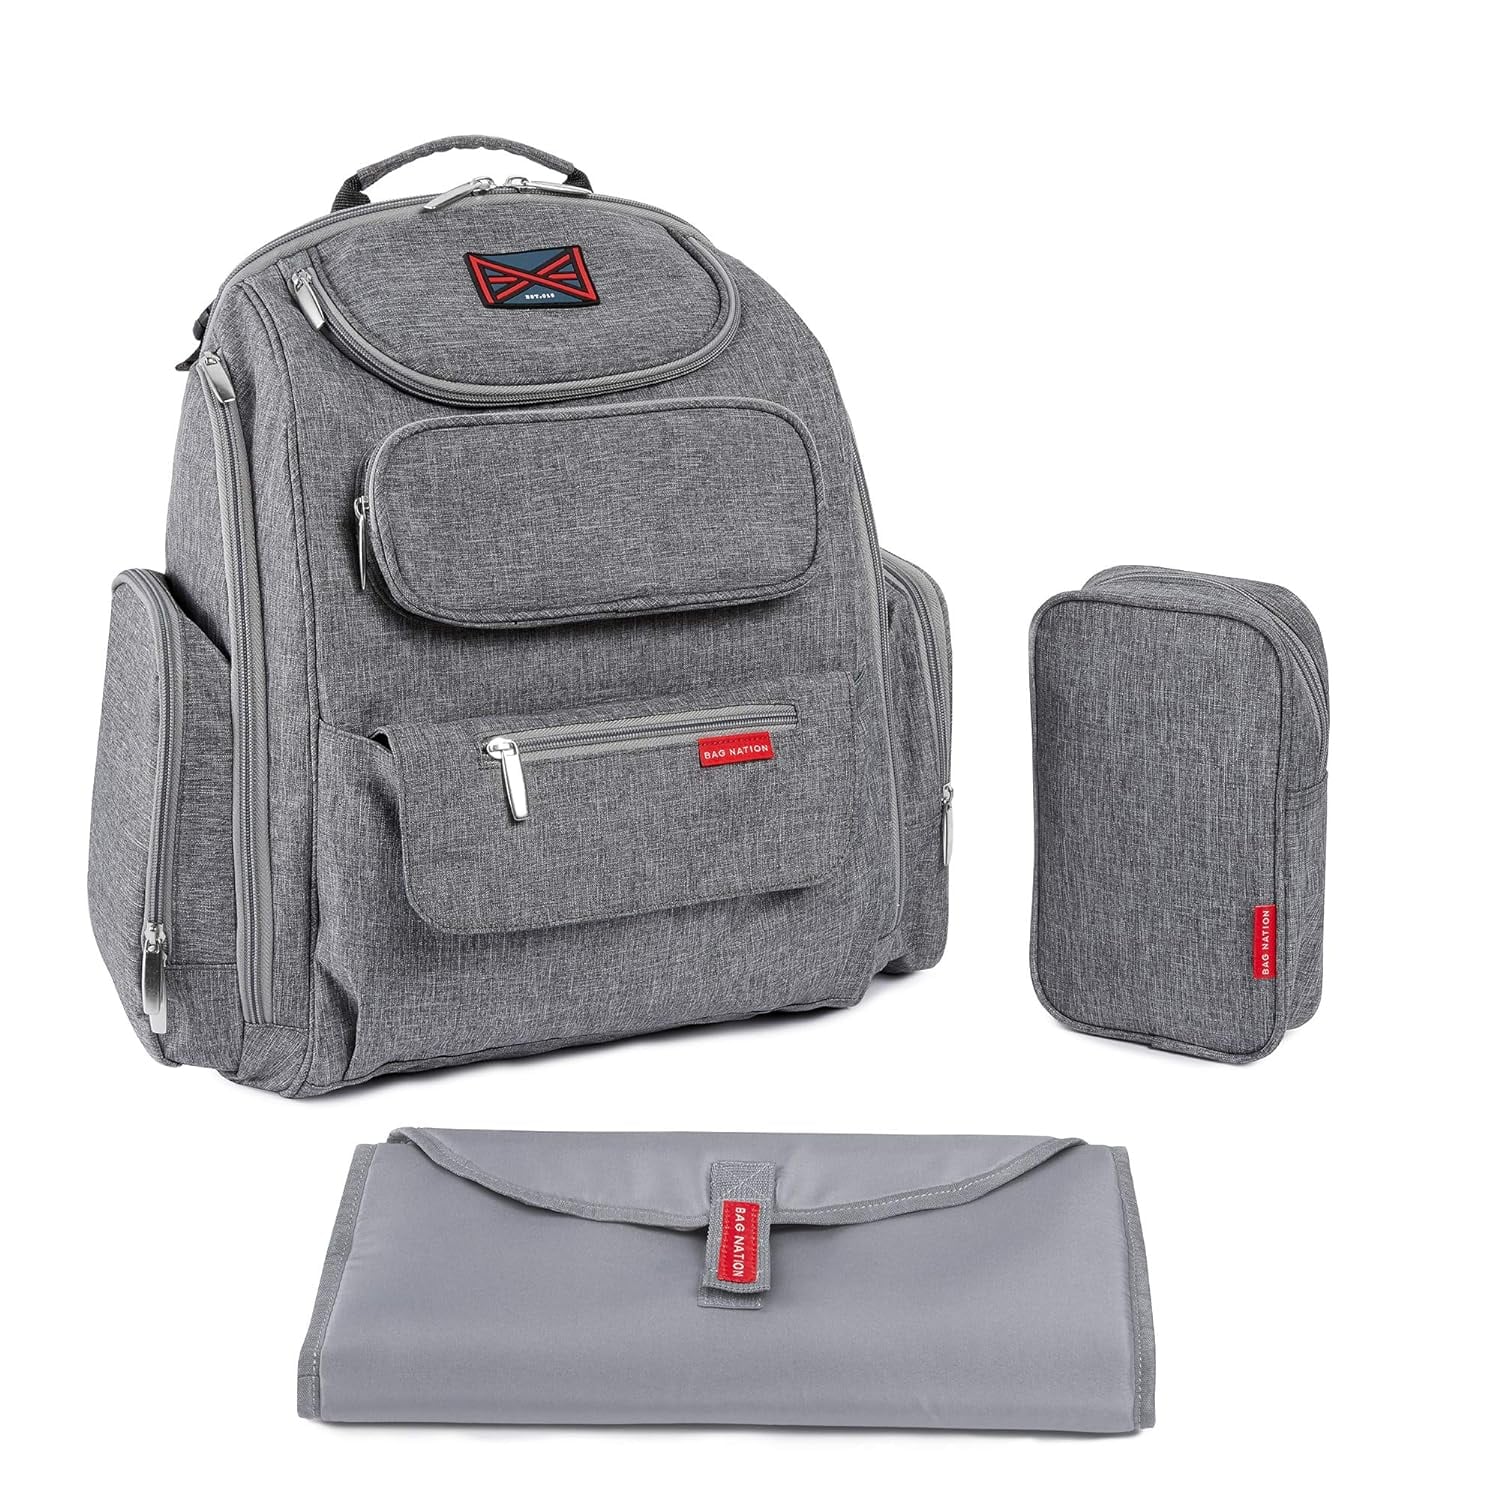 <p><a href="http://www.amazon.com/Bag-Nation-Backpack-Stroller-Changing/dp/B0722W1WCT">BUY NOW</a></p><p>$80</p><p><a href="http://www.amazon.com/Bag-Nation-Backpack-Stroller-Changing/dp/B0722W1WCT" class="ga-track"><strong>Bag Nation Extra Large Diaper Bag Backpack</strong></a> ($80)</p> <p>There's a reason diaper bags are so popular among parents with little kids - we have to carry a lot, and this bag is perfect whether you're going to the park for a few hours or taking a weekend away. It has 14 pockets, so lots of space, and it works to carry on your back, hold in your hands, or hang on the stroller during a walk. </p> <p><strong>What reviewers say: "</strong>I really like this bag. It's the right size...not too big not too small. It has great compartments, lots of nooks and crannies and quality zippers. I have a place for everything. The material is great and it's neutral and basic in design so my husband can use it too."</p>